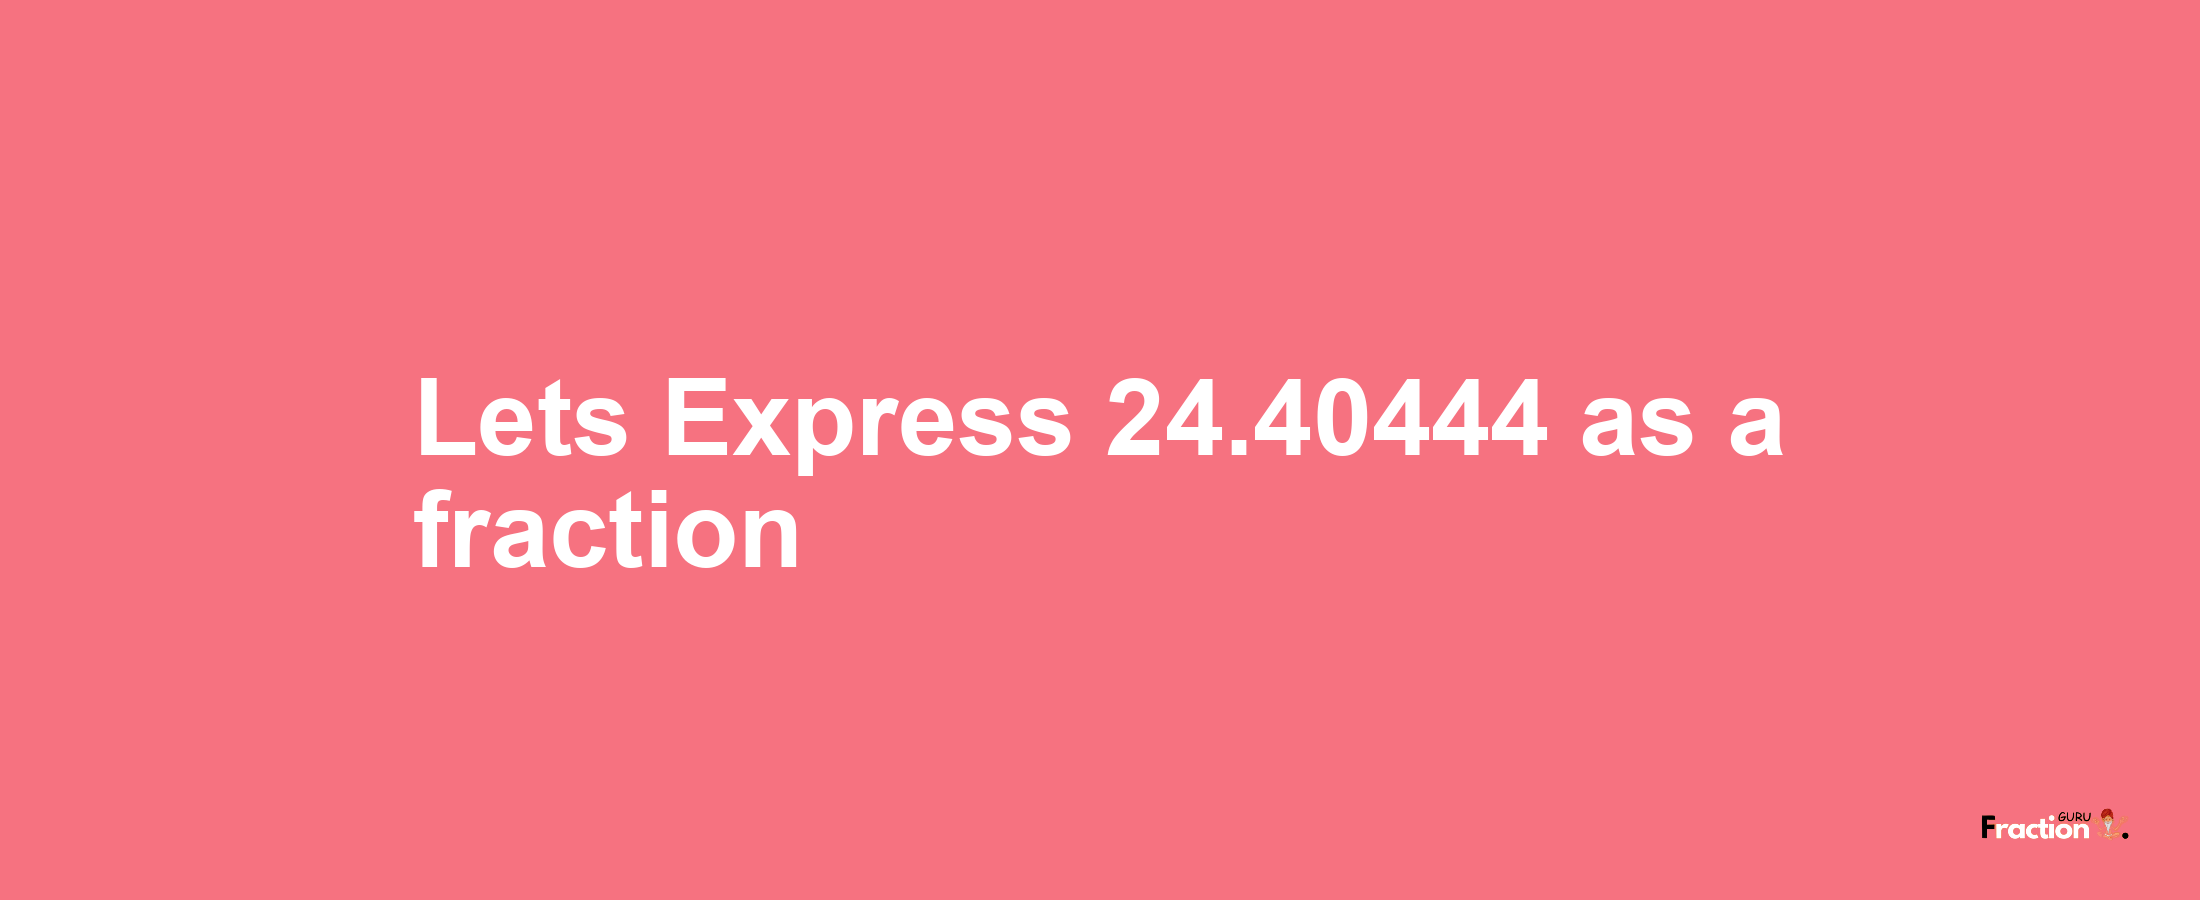 Lets Express 24.40444 as afraction